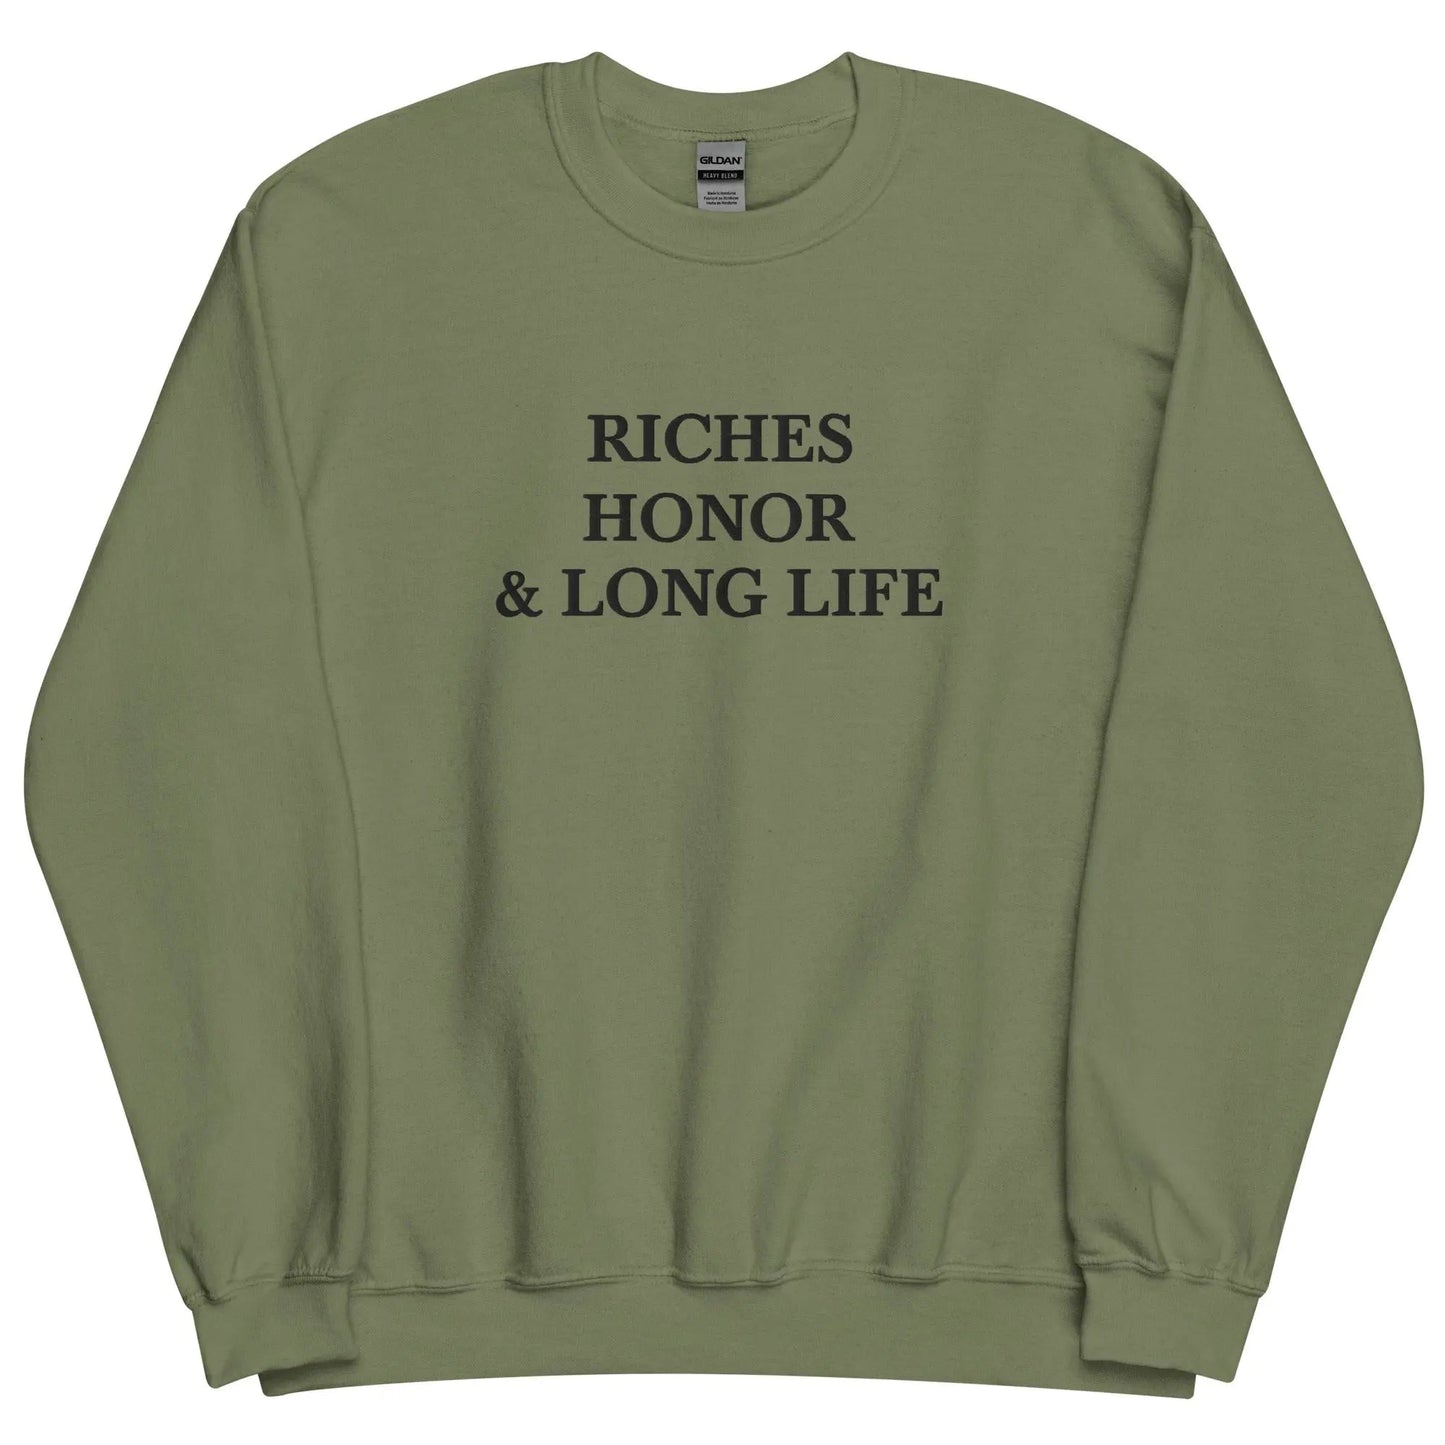 Embroidered Riches Honor & Long Life Crewneck Sweatshirt-clothes- sweater-Military Green-S-mysticalcherry